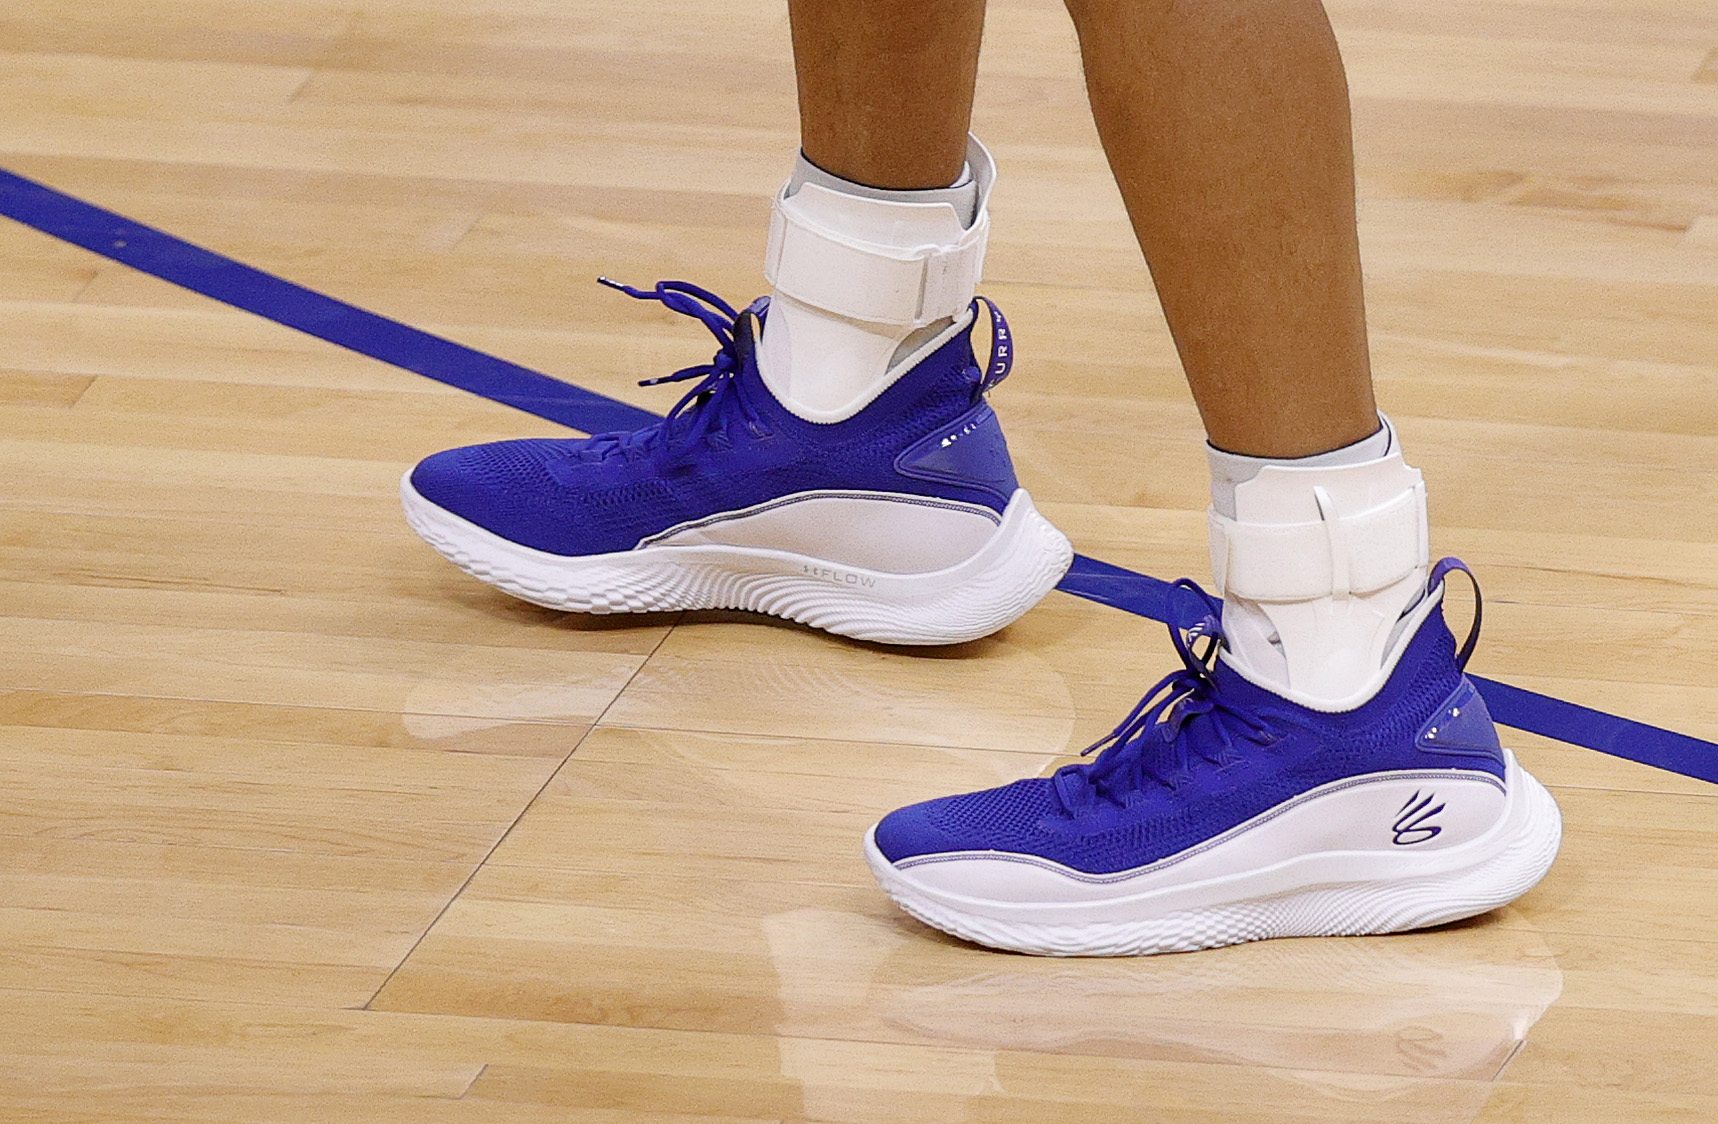 Curry pays respect to slain man, sending family All-Star shoes